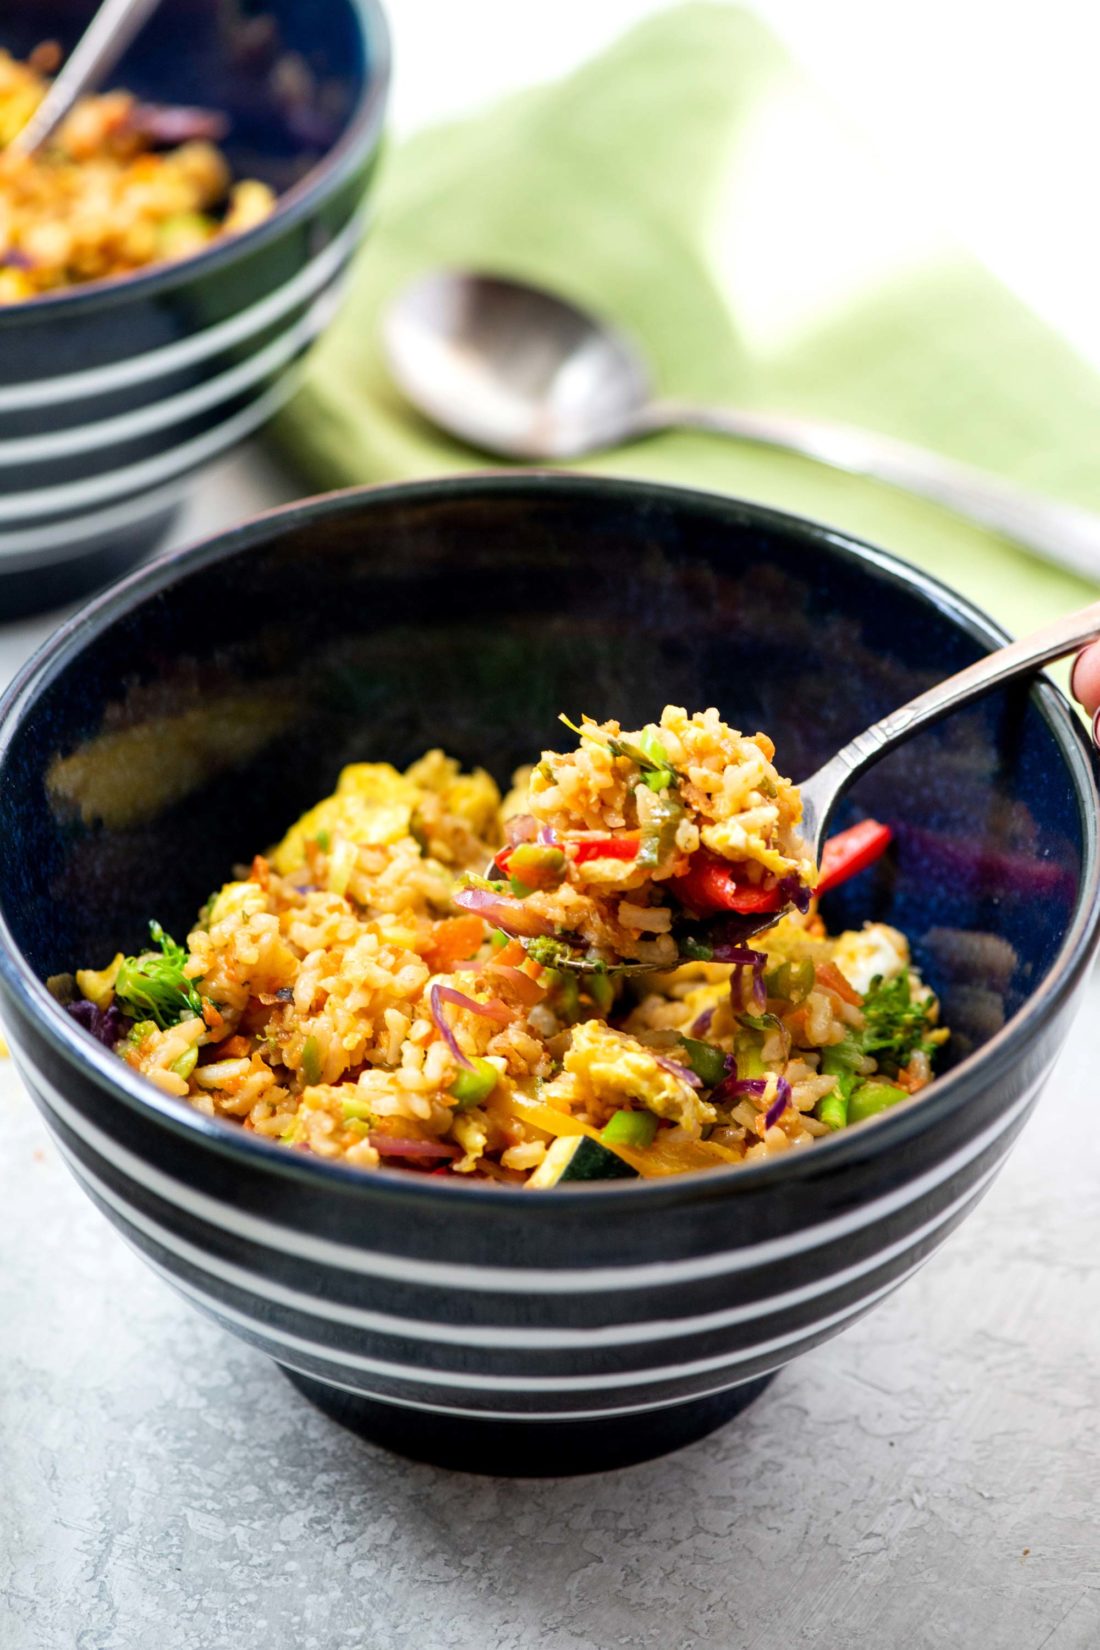 Fork scooping Vegetable Stir Fried Rice from a bowl.